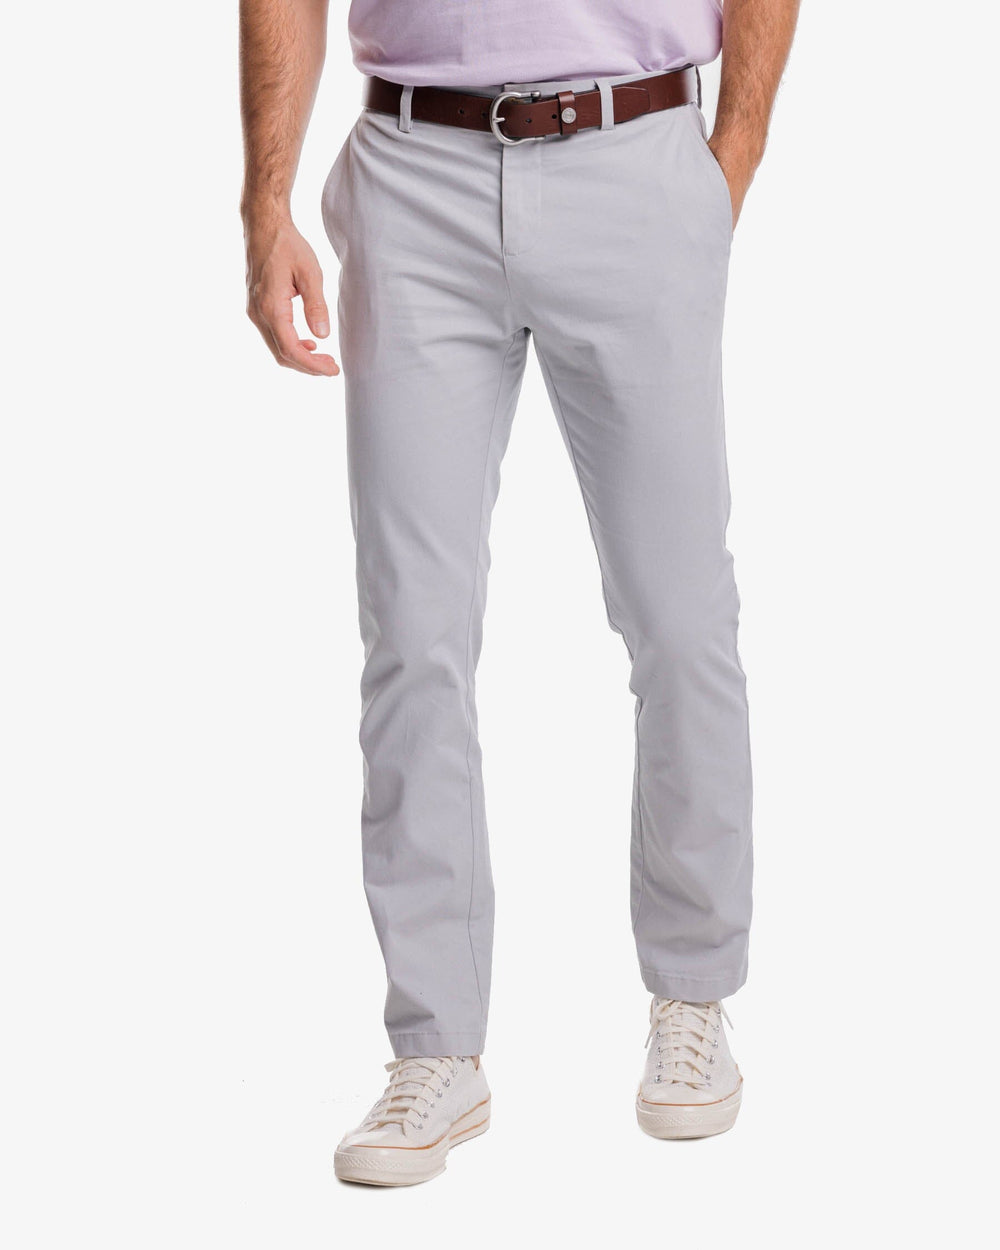 https://southerntide.com/cdn/shop/files/channel-marker-chino-pant-seagull-grey-front-7256.jpg?v=1701231538&width=1000